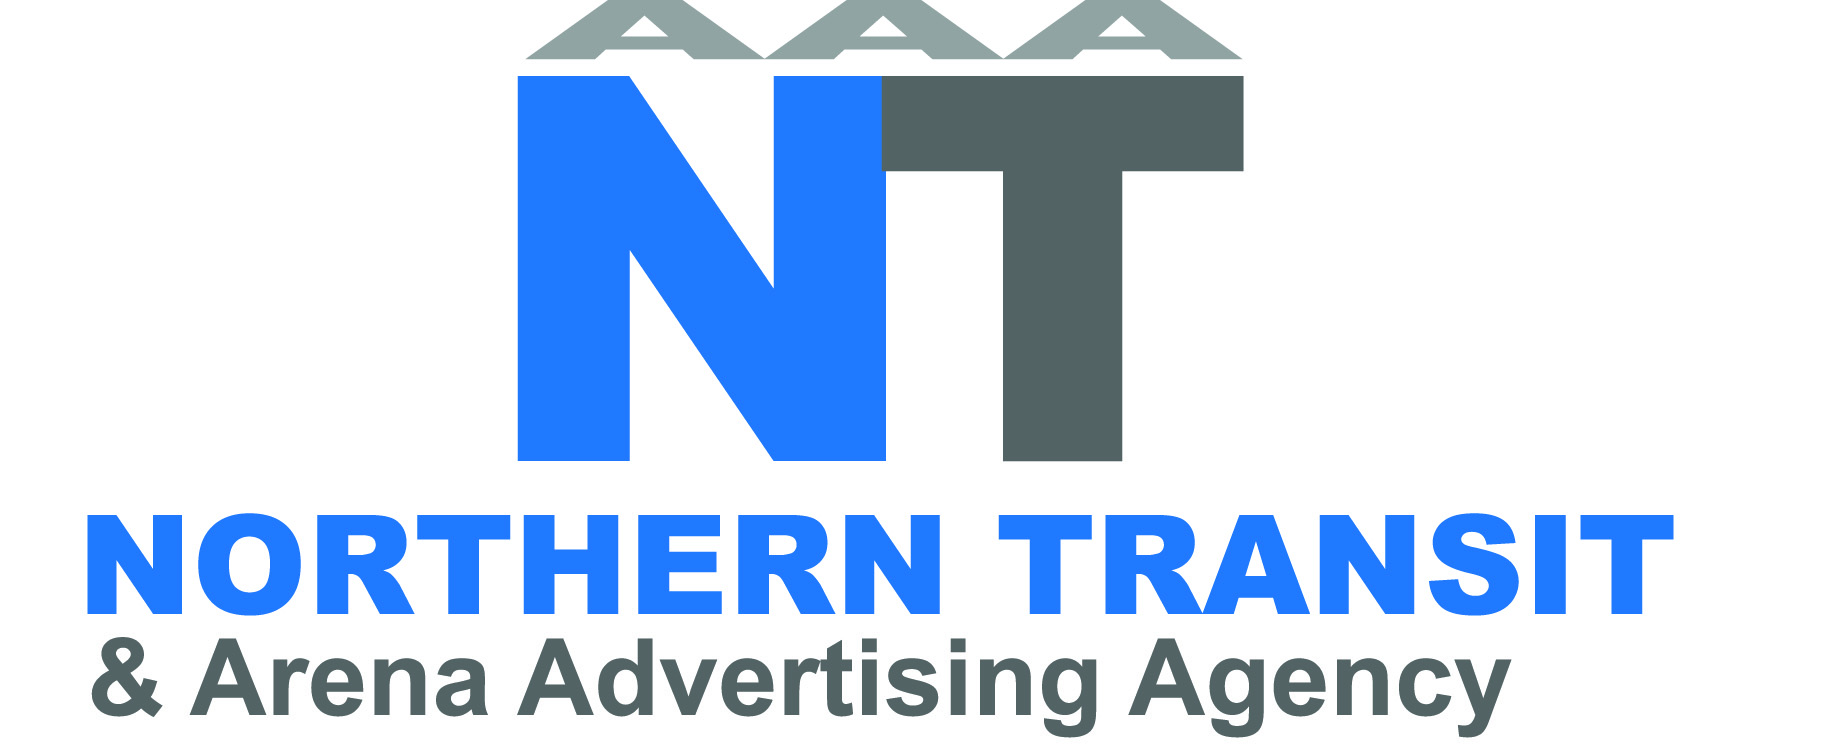 Northern Transit and Arena Advertising Agency (NTAAA) logo